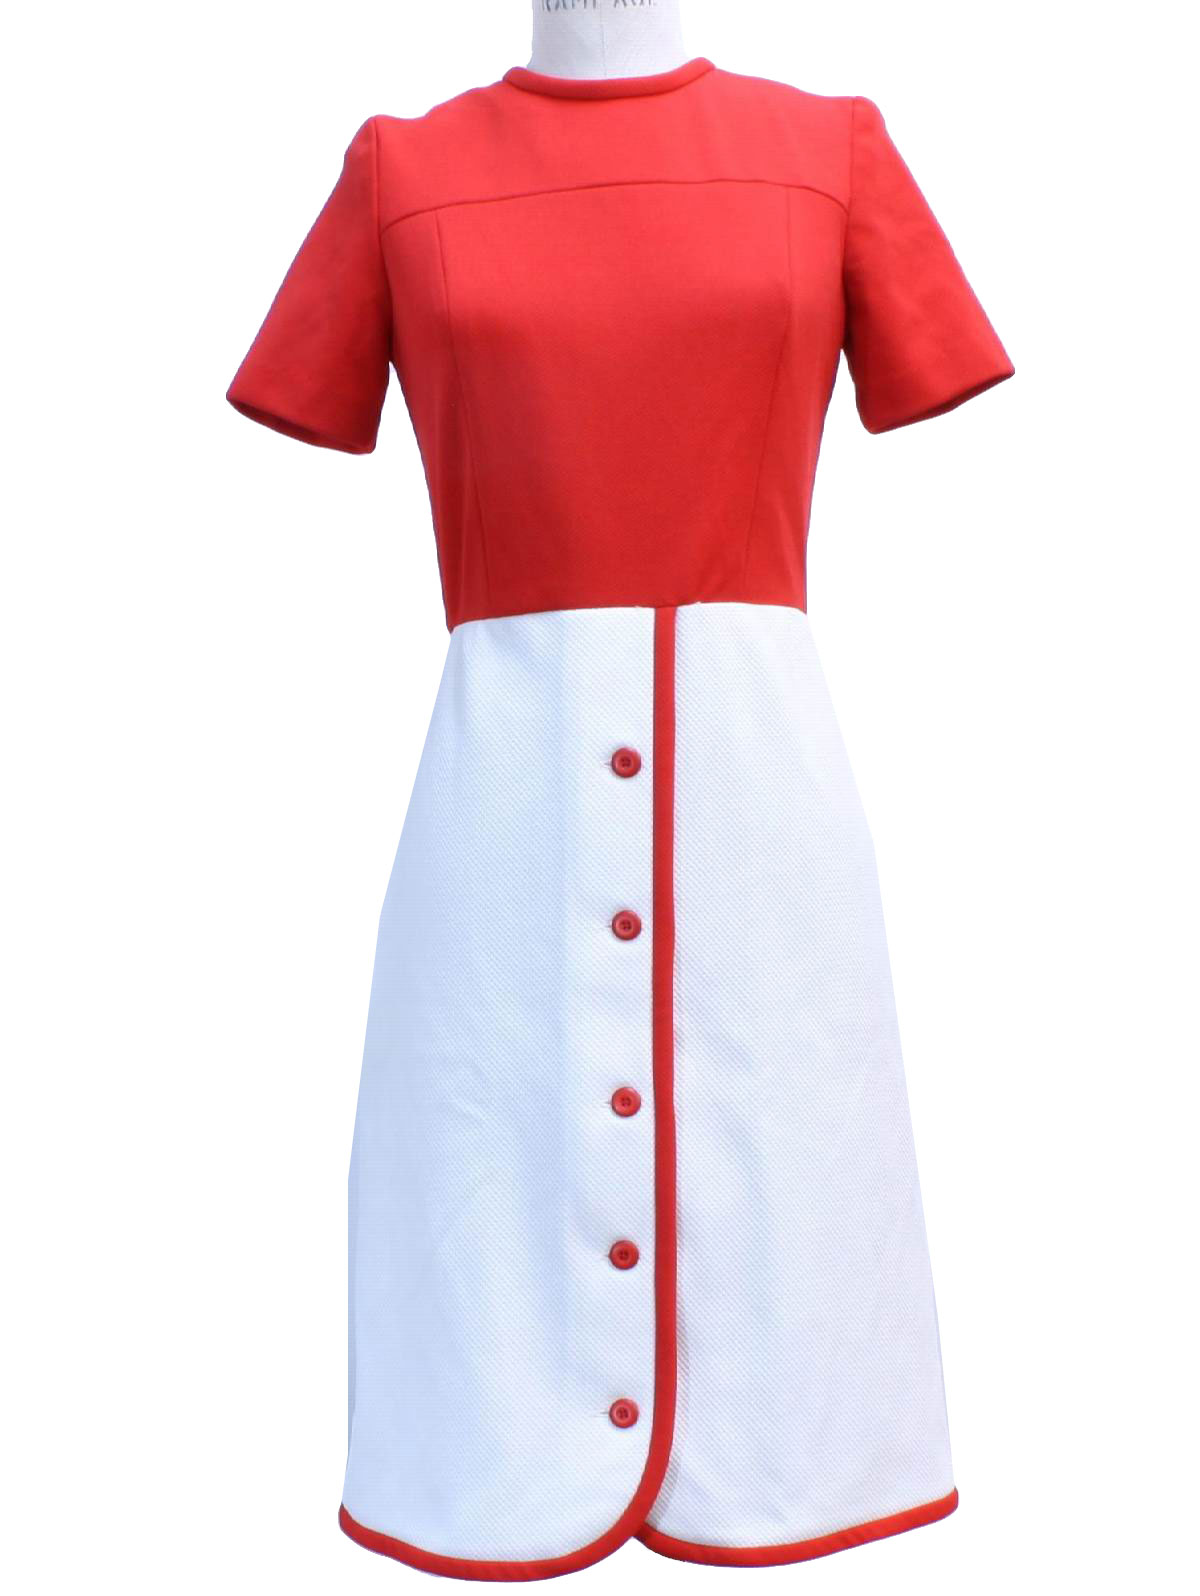 mod knit dress. A button front skirt with banded trim down the front ...